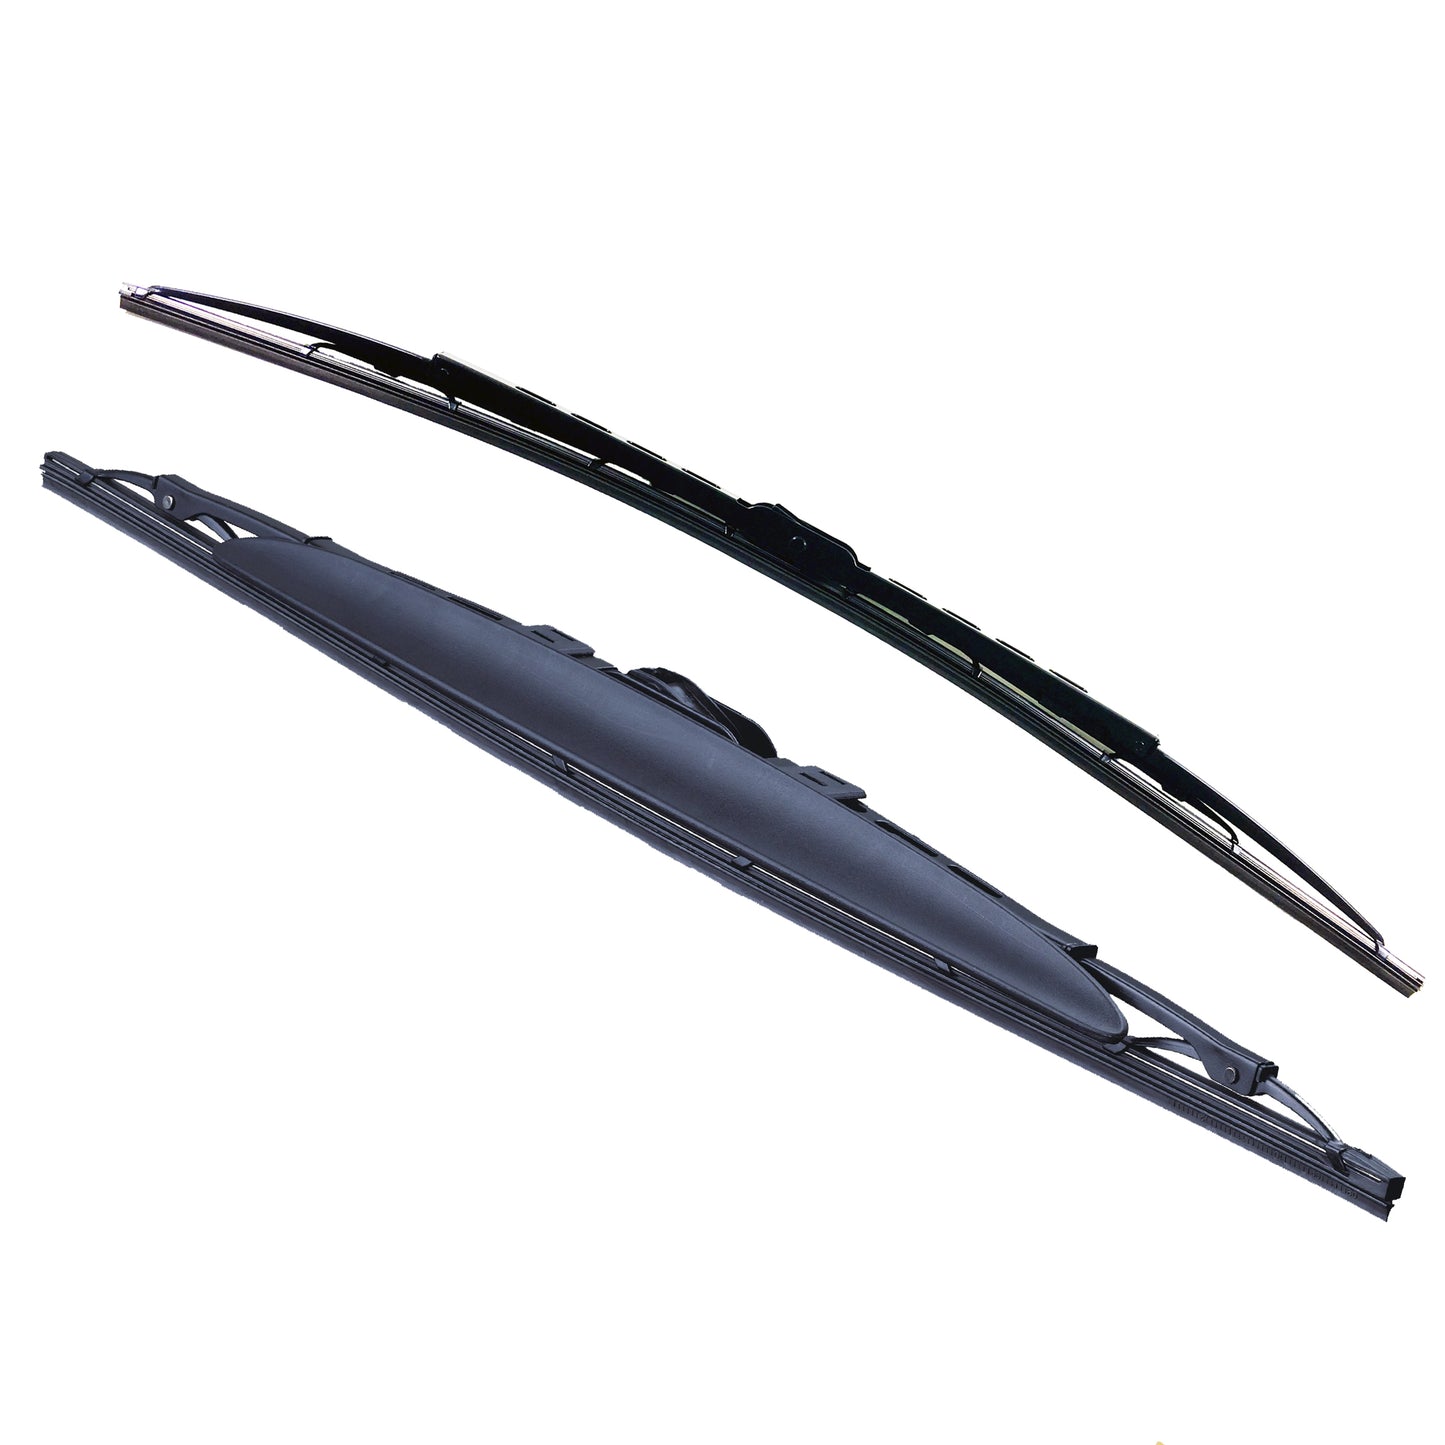 MERCEDES-BENZ C-CLASS S203 EARLY Estate Apr 2001 to Sep 2003 Wiper Blade Kit